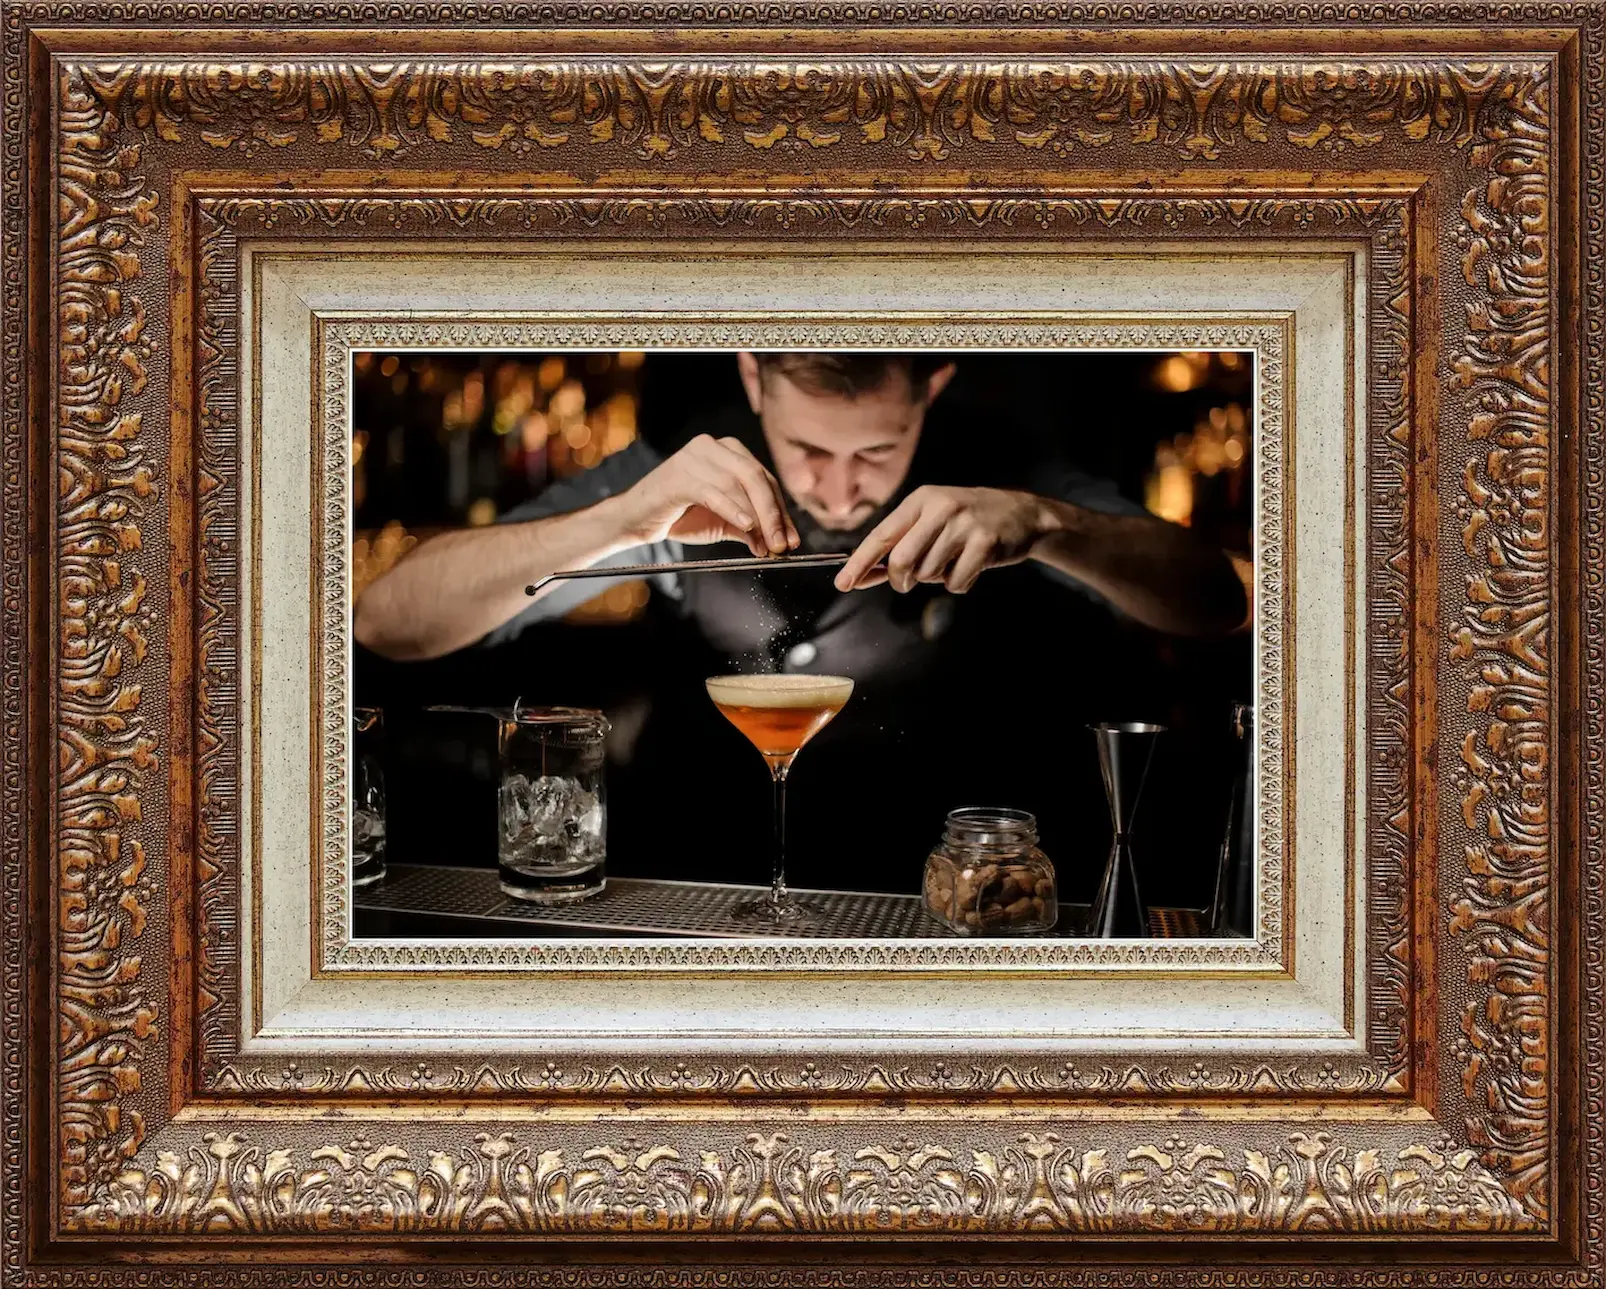 Image of a bartender hired for a party presenting a cocktail